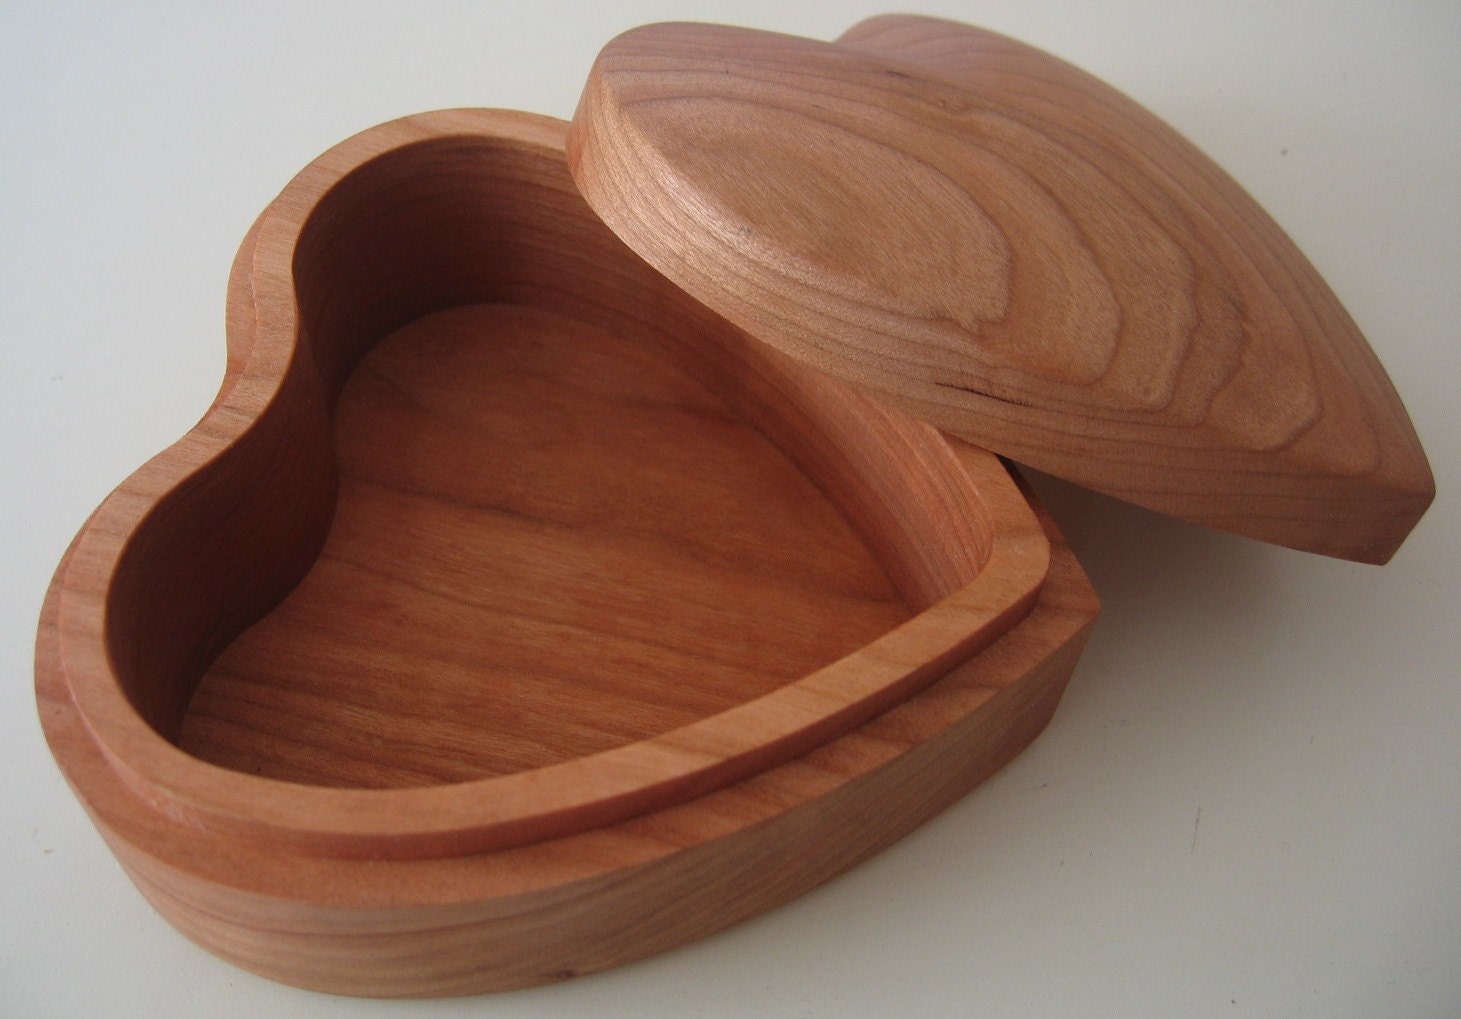 Solid Cherry Heart Shaped Jewelry Box by woodenheartbox on Etsy